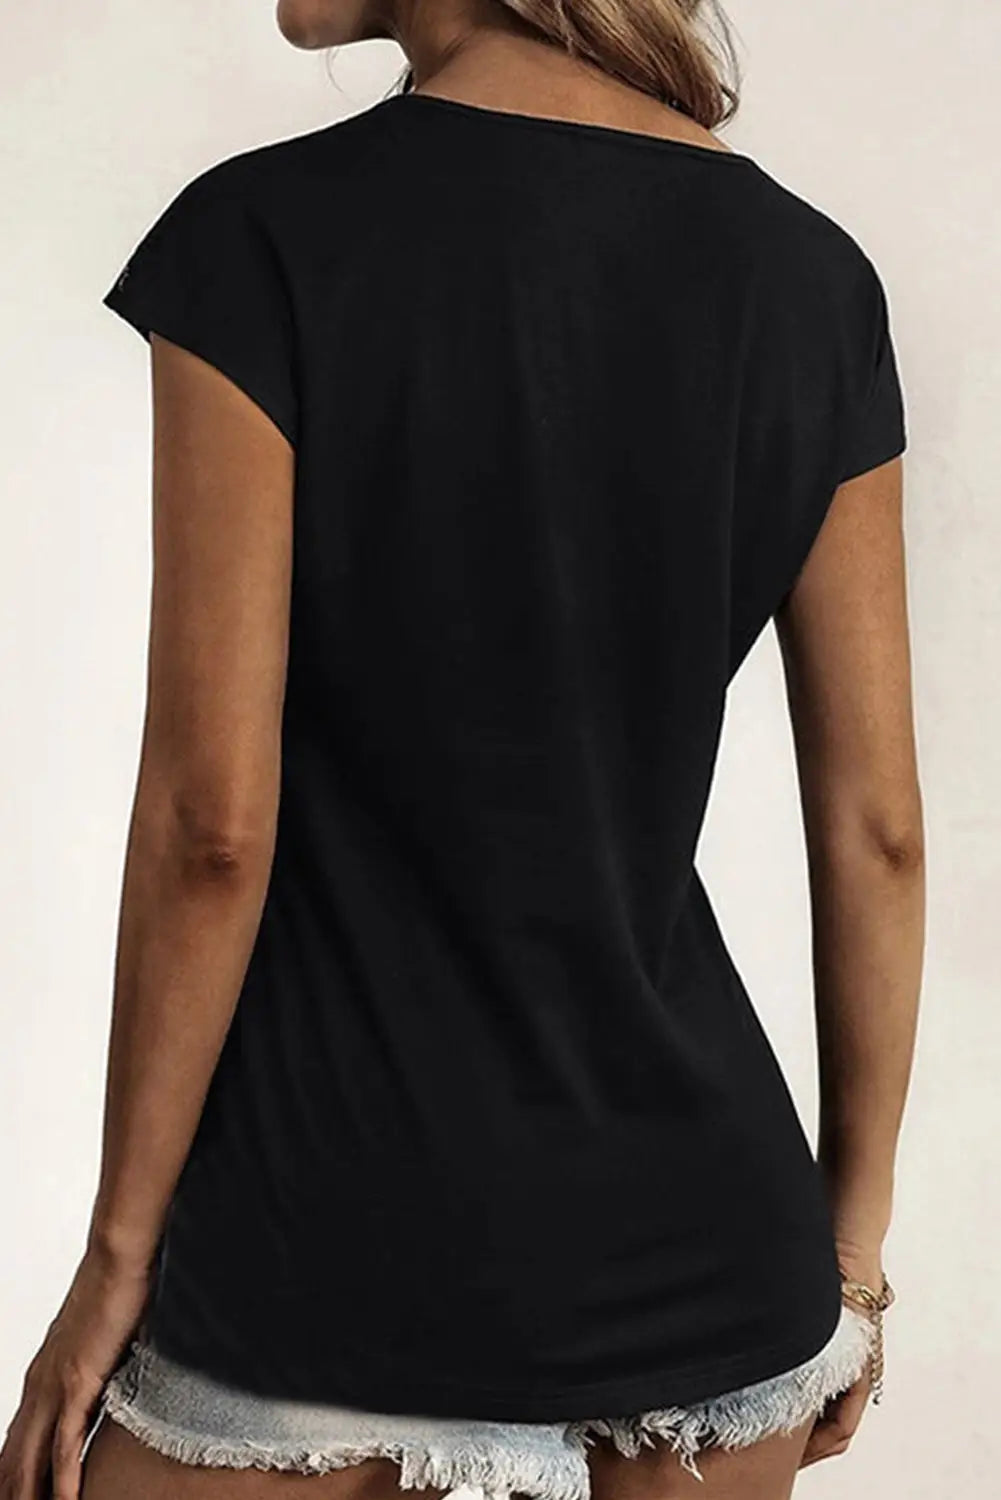 Black zip neck lace splicing tee - t-shirts